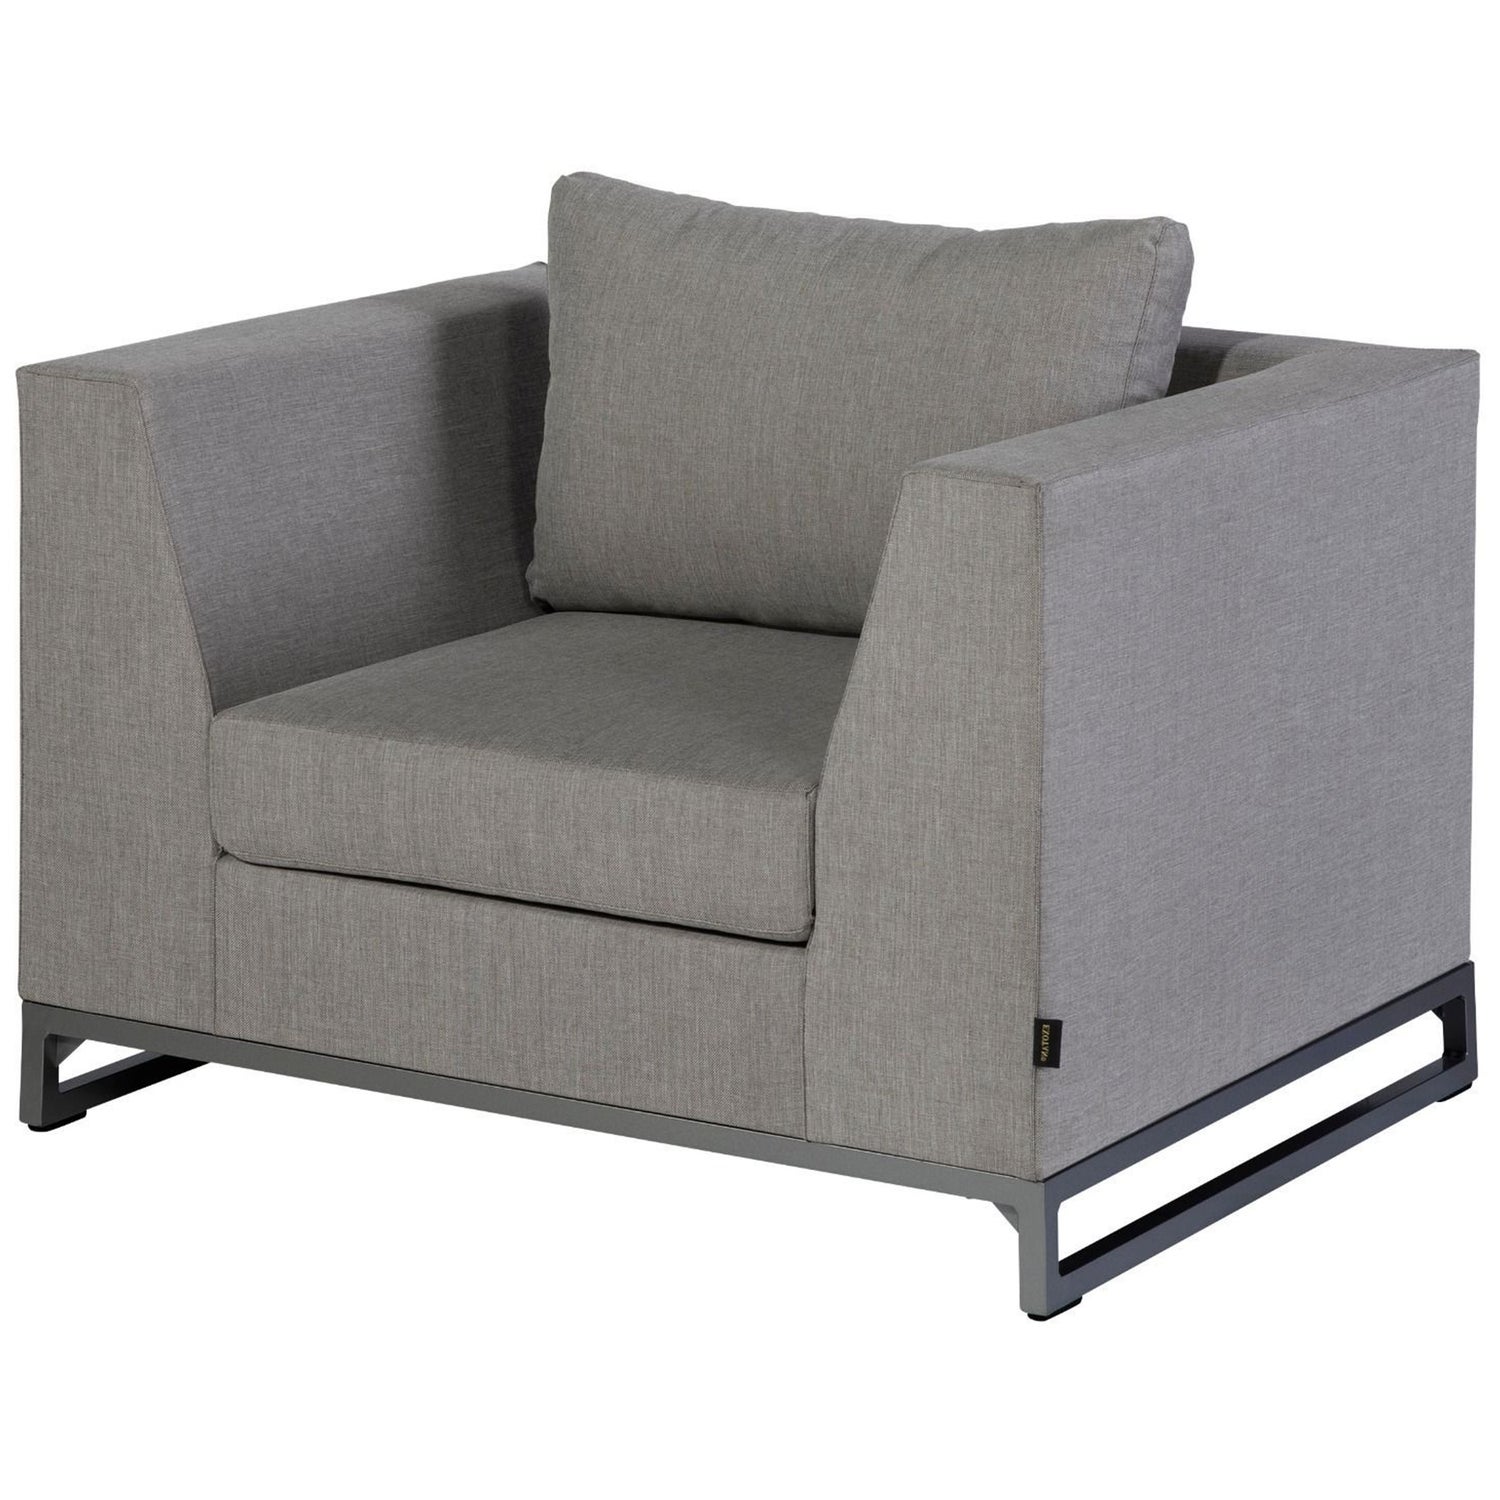 CH1224CTA-01_VS_EXT_Rhodos_fauteuil_taupe_SA.jpg?auto=webp&format=png&width=1500&height=1500